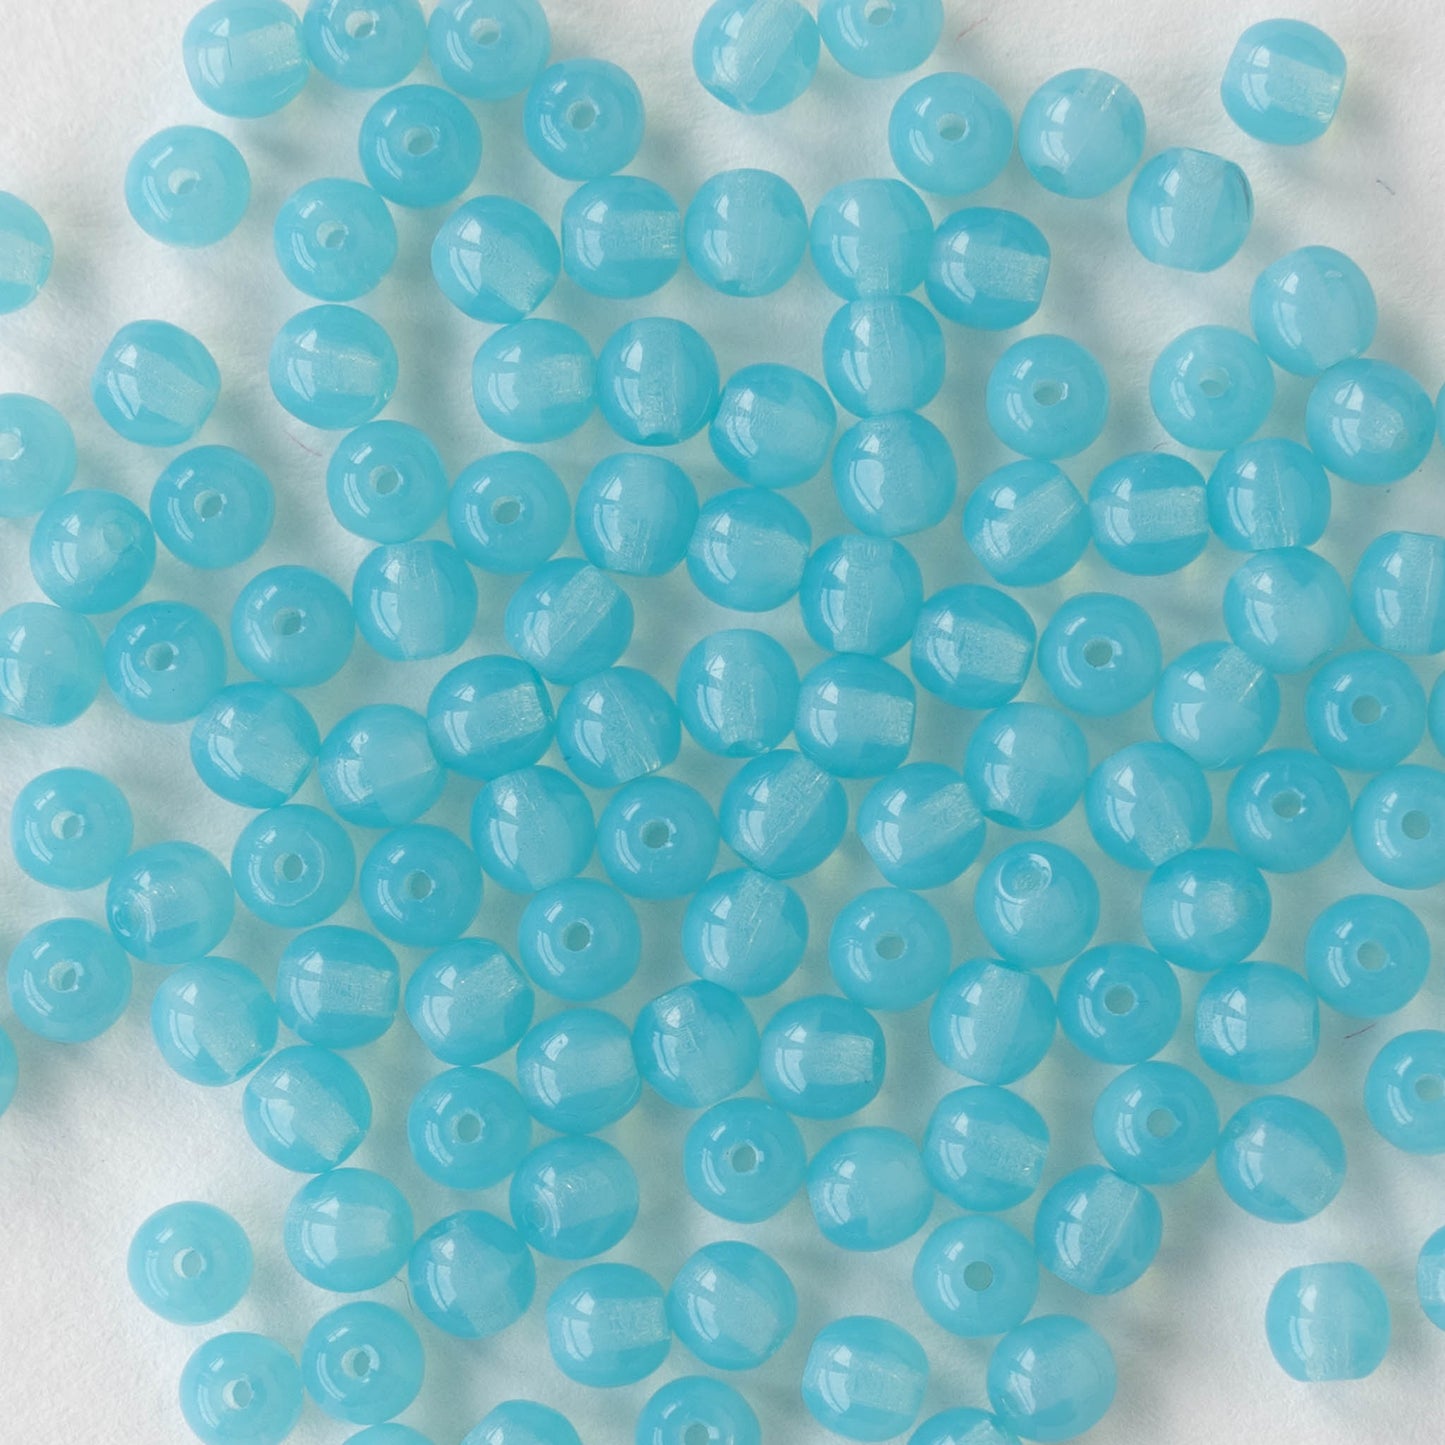 4mm Czech Fire Polish Round Bead, Persian Turquoise AB, 50 pieces